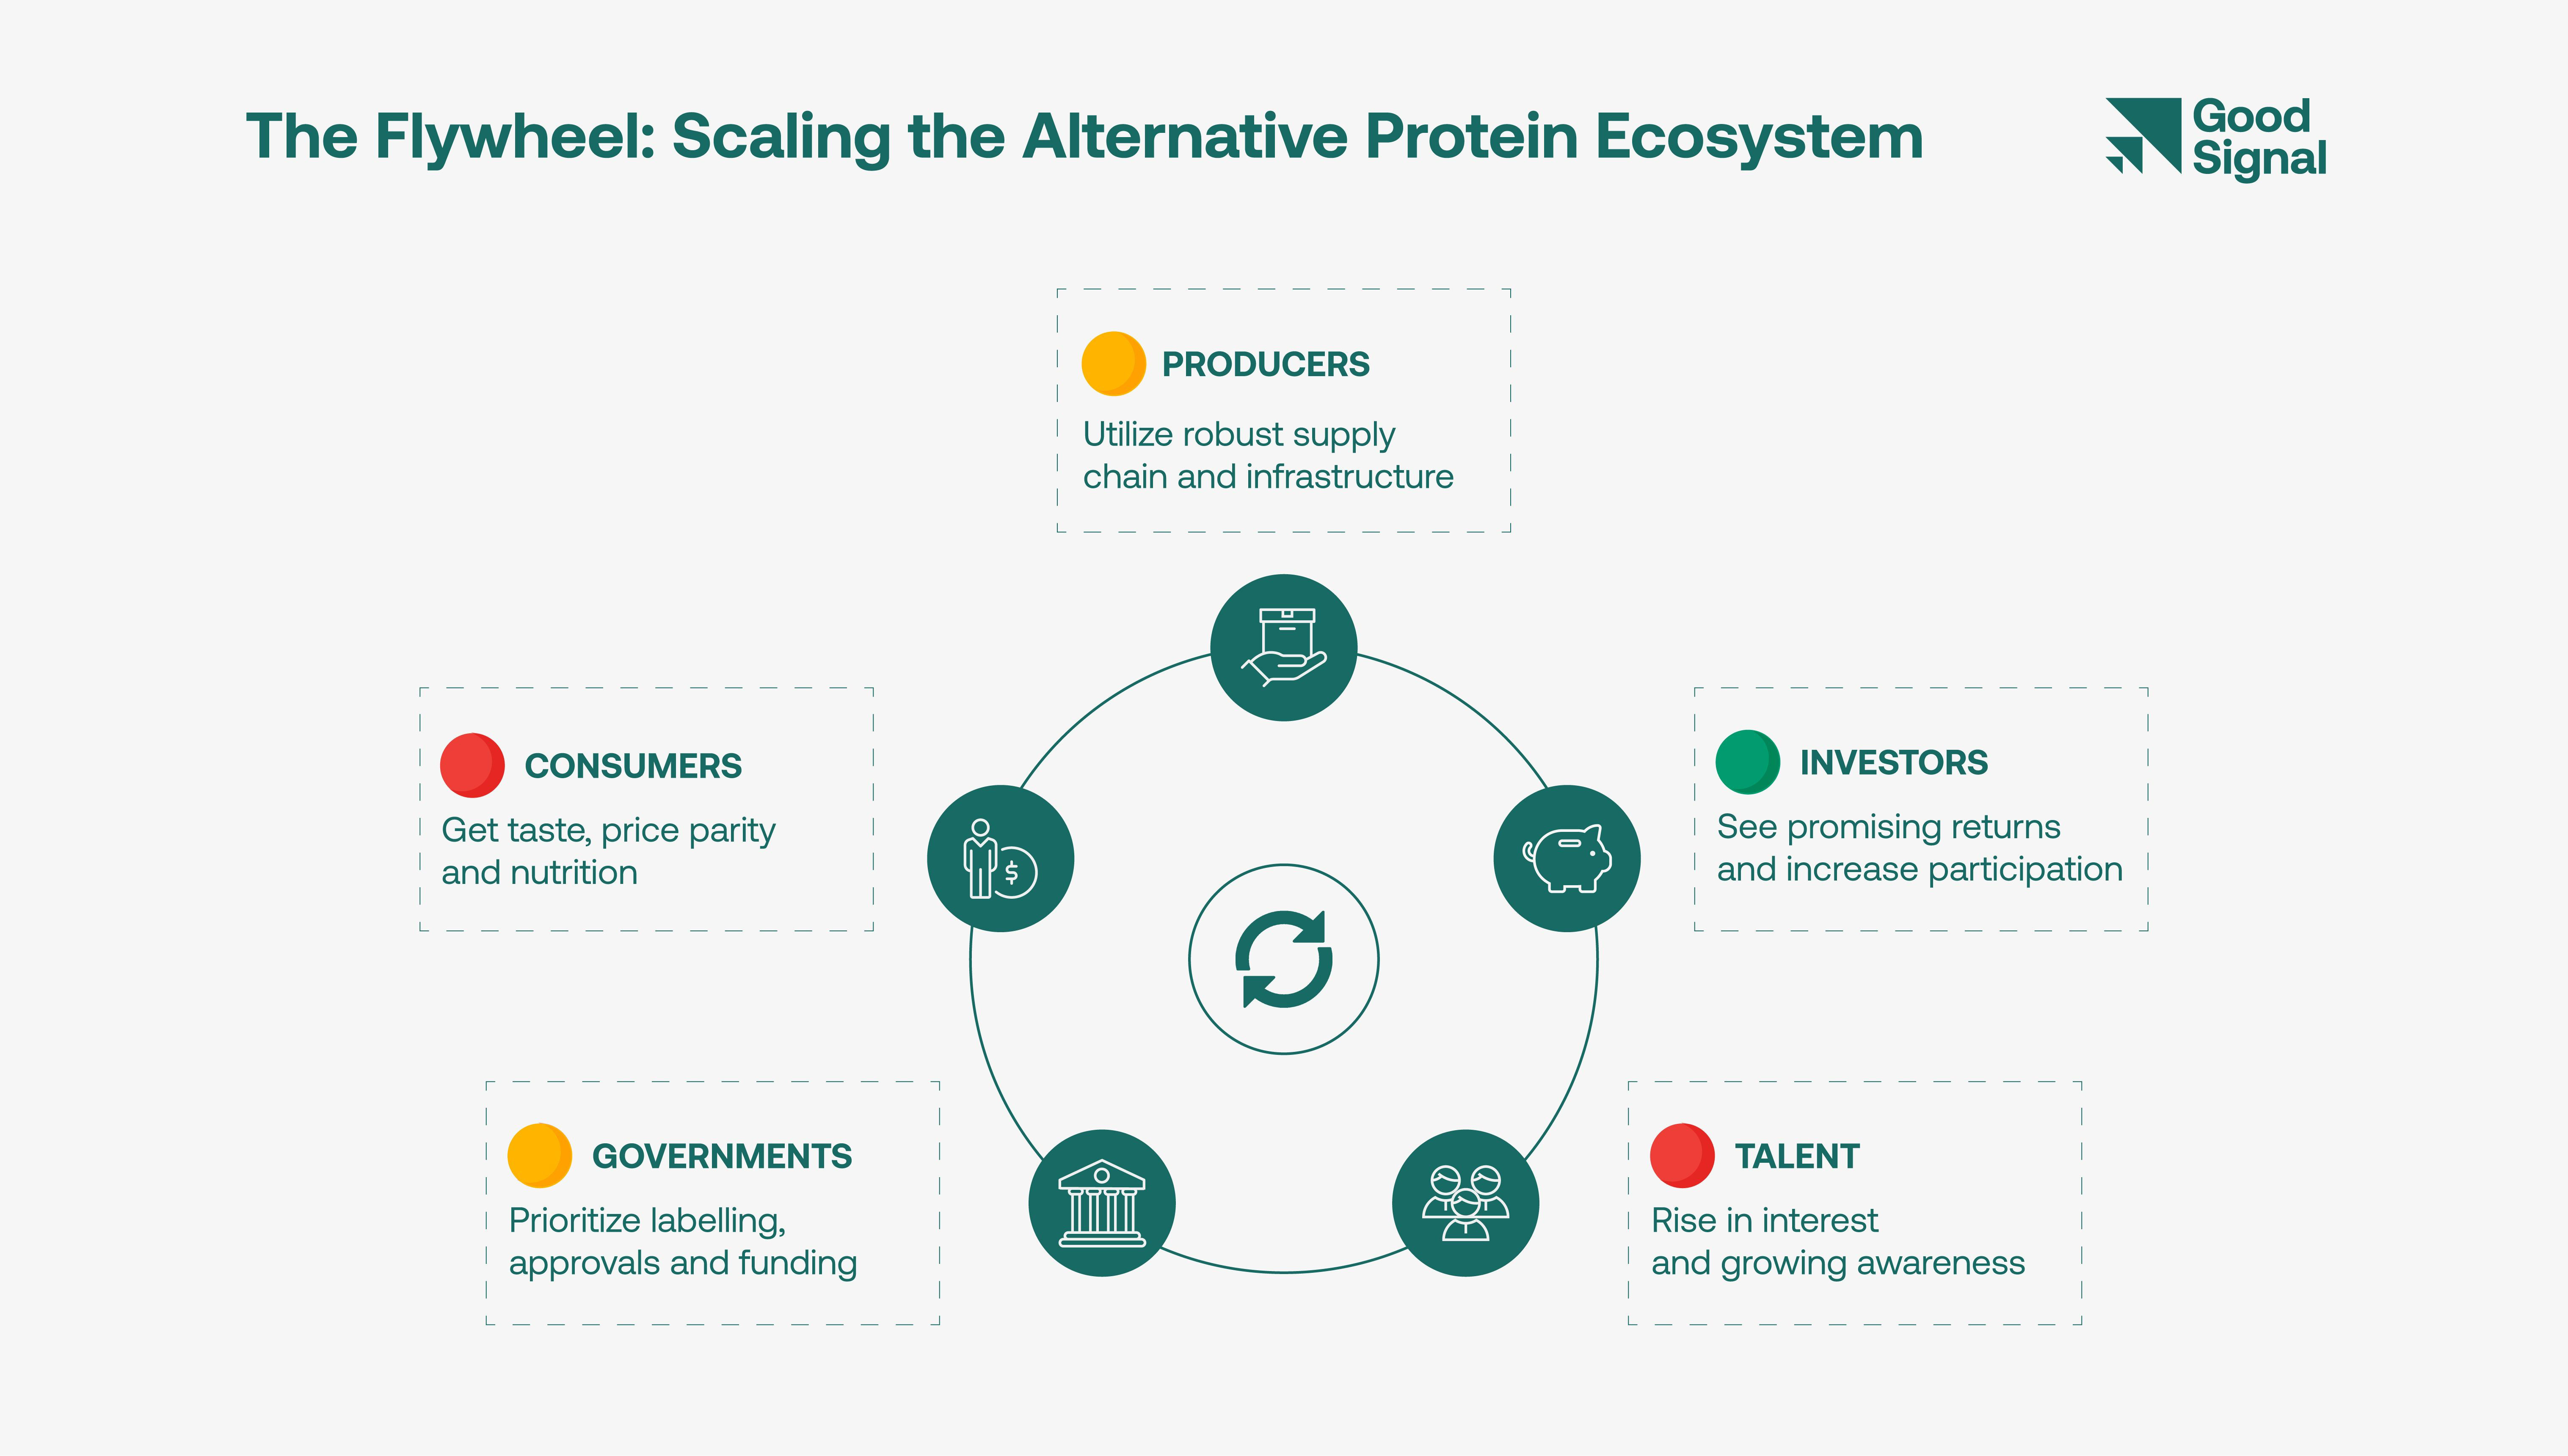 Can Alternative Proteins Scale?